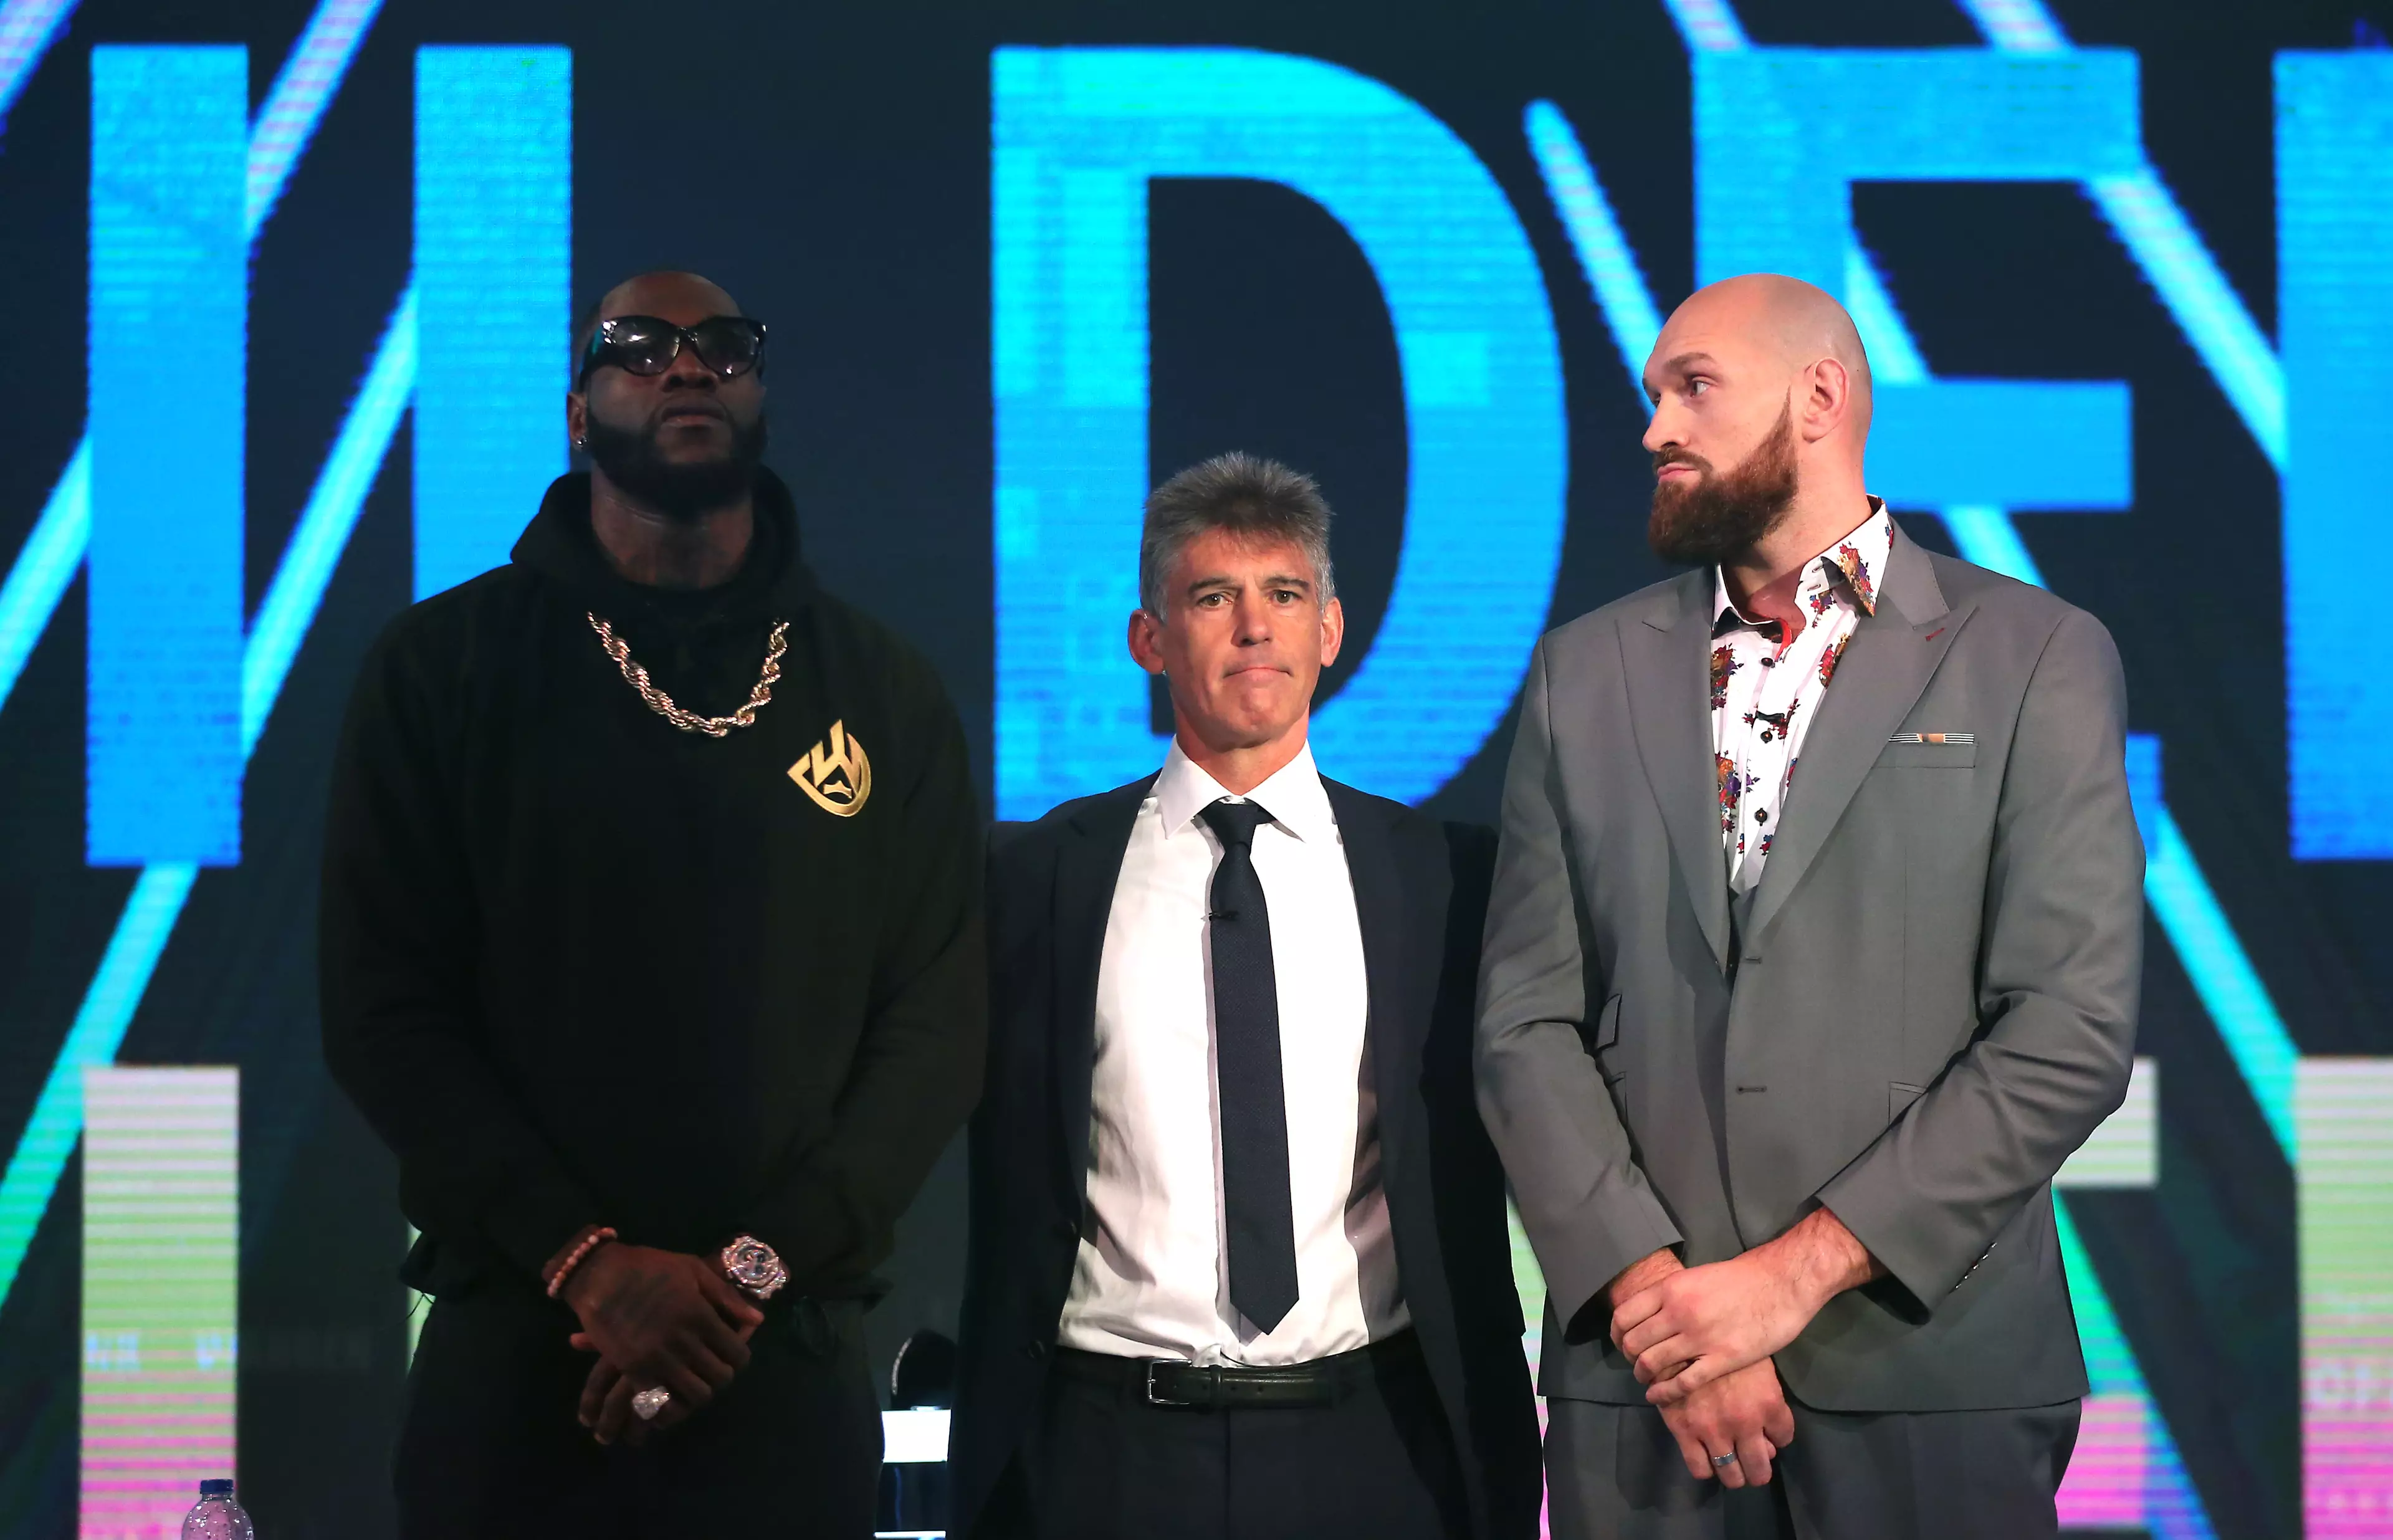 Wilder and Fury